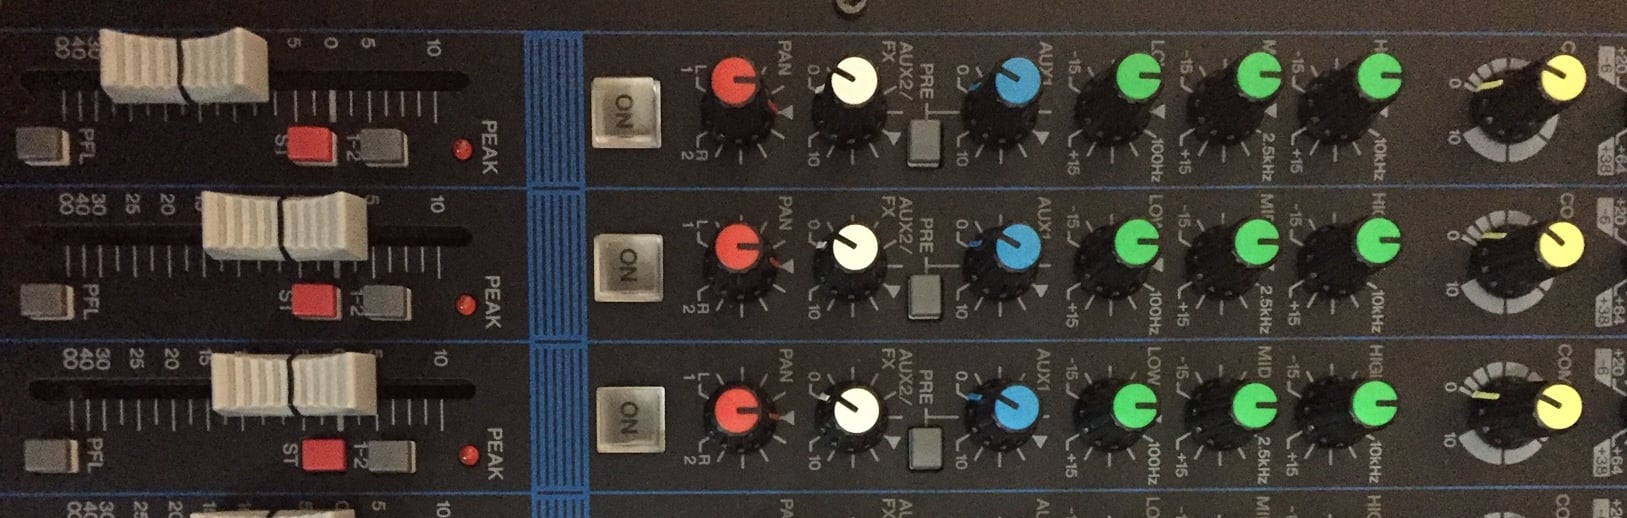 [PART 1] Get Better Live Sound: What to Look for in a Compact Mixer